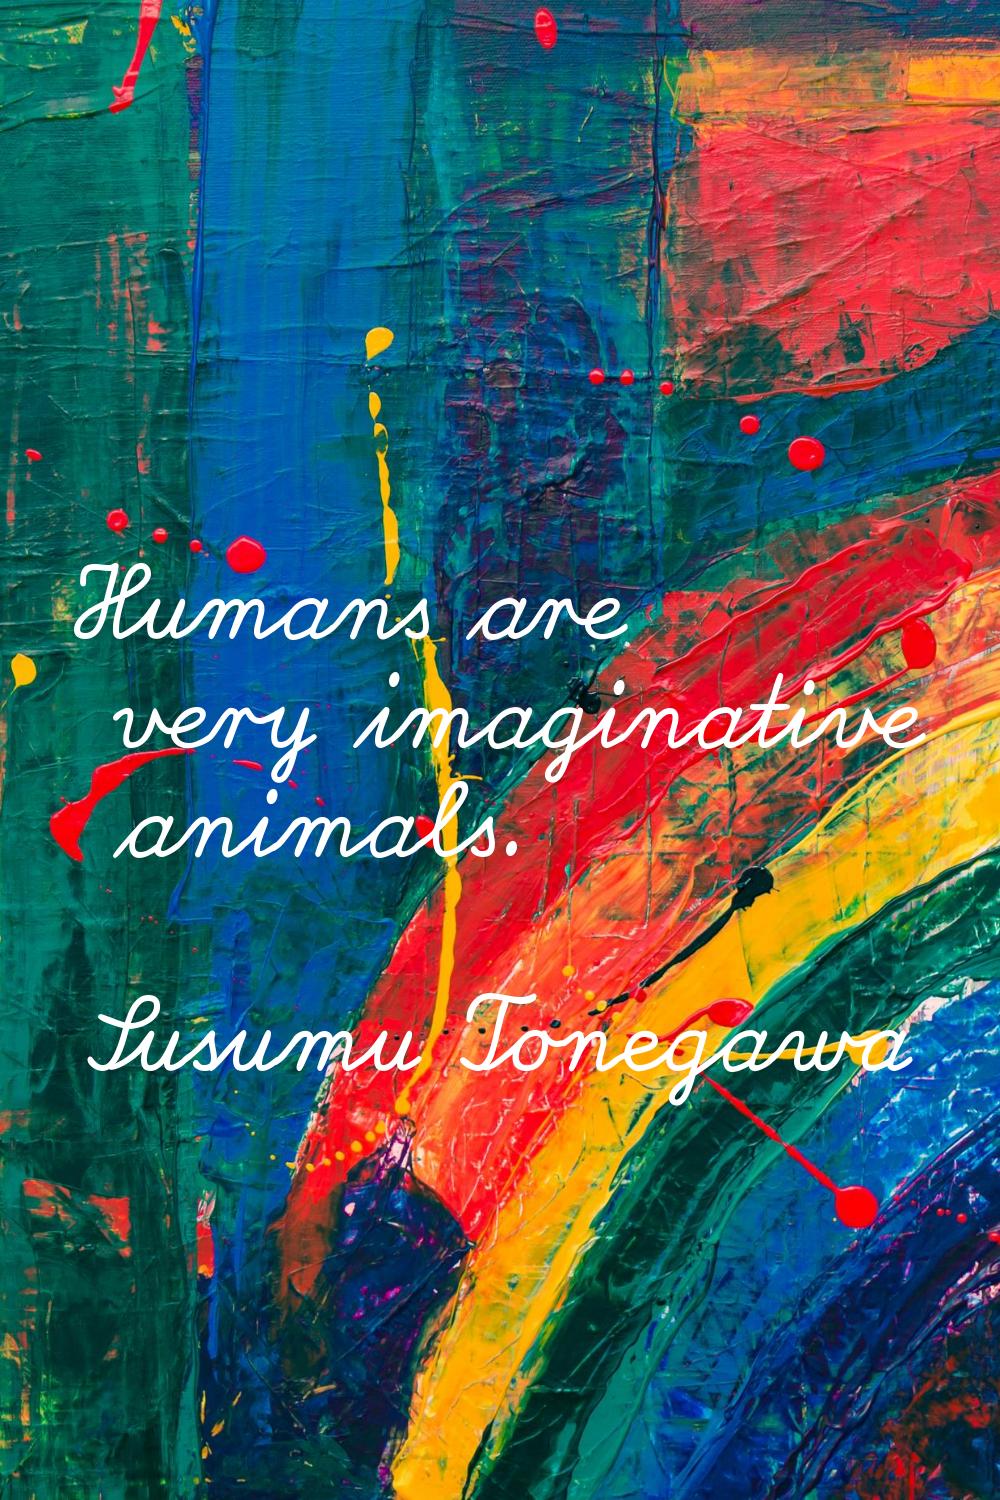 Humans are very imaginative animals.